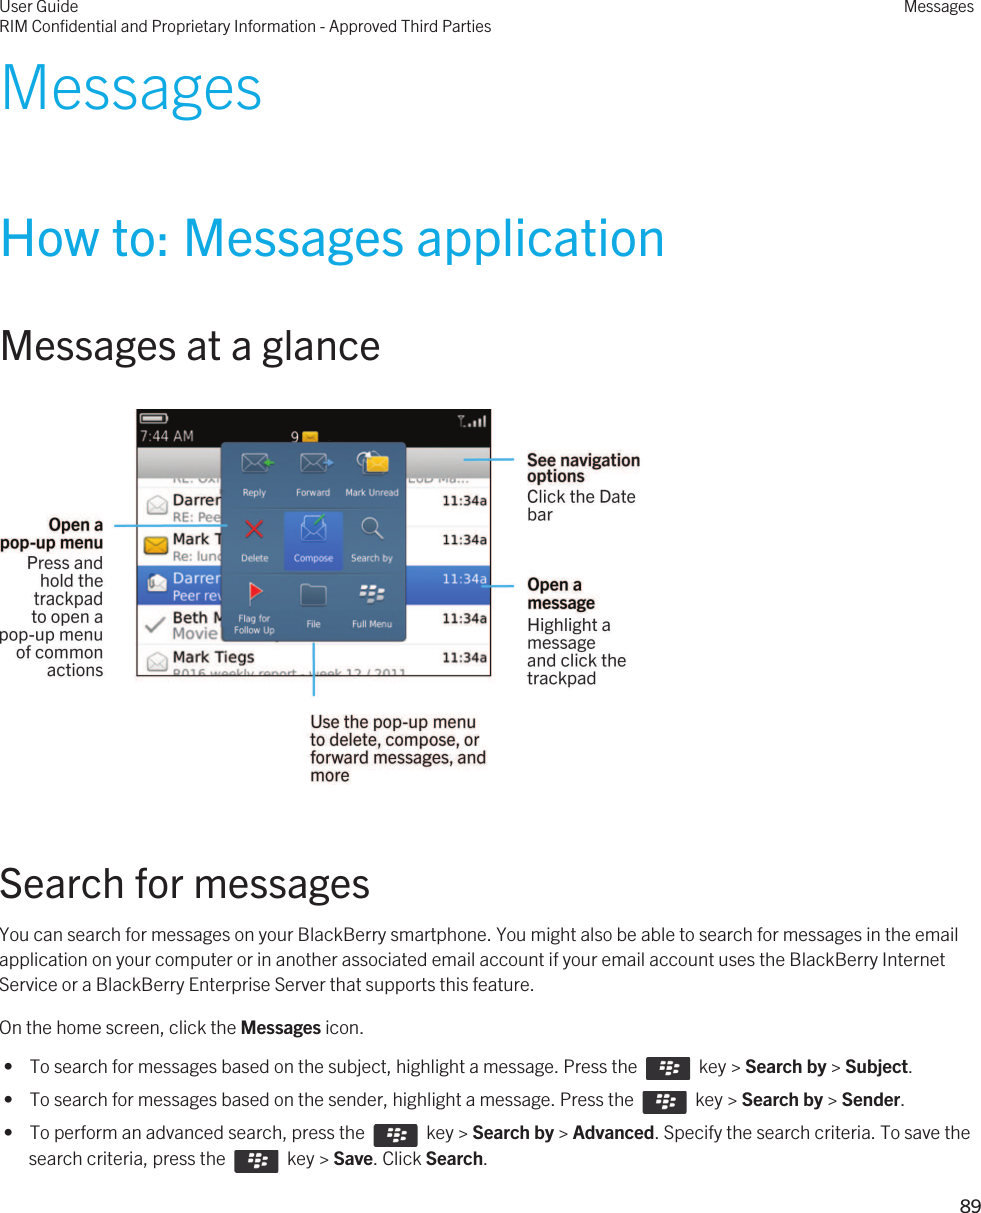 MessagesHow to: Messages applicationMessages at a glance  Search for messagesYou can search for messages on your BlackBerry smartphone. You might also be able to search for messages in the email application on your computer or in another associated email account if your email account uses the BlackBerry Internet Service or a BlackBerry Enterprise Server that supports this feature.On the home screen, click the Messages icon. •  To search for messages based on the subject, highlight a message. Press the    key &gt; Search by &gt; Subject. •  To search for messages based on the sender, highlight a message. Press the    key &gt; Search by &gt; Sender. •  To perform an advanced search, press the    key &gt; Search by &gt; Advanced. Specify the search criteria. To save the search criteria, press the    key &gt; Save. Click Search.User GuideRIM Confidential and Proprietary Information - Approved Third PartiesMessages89 